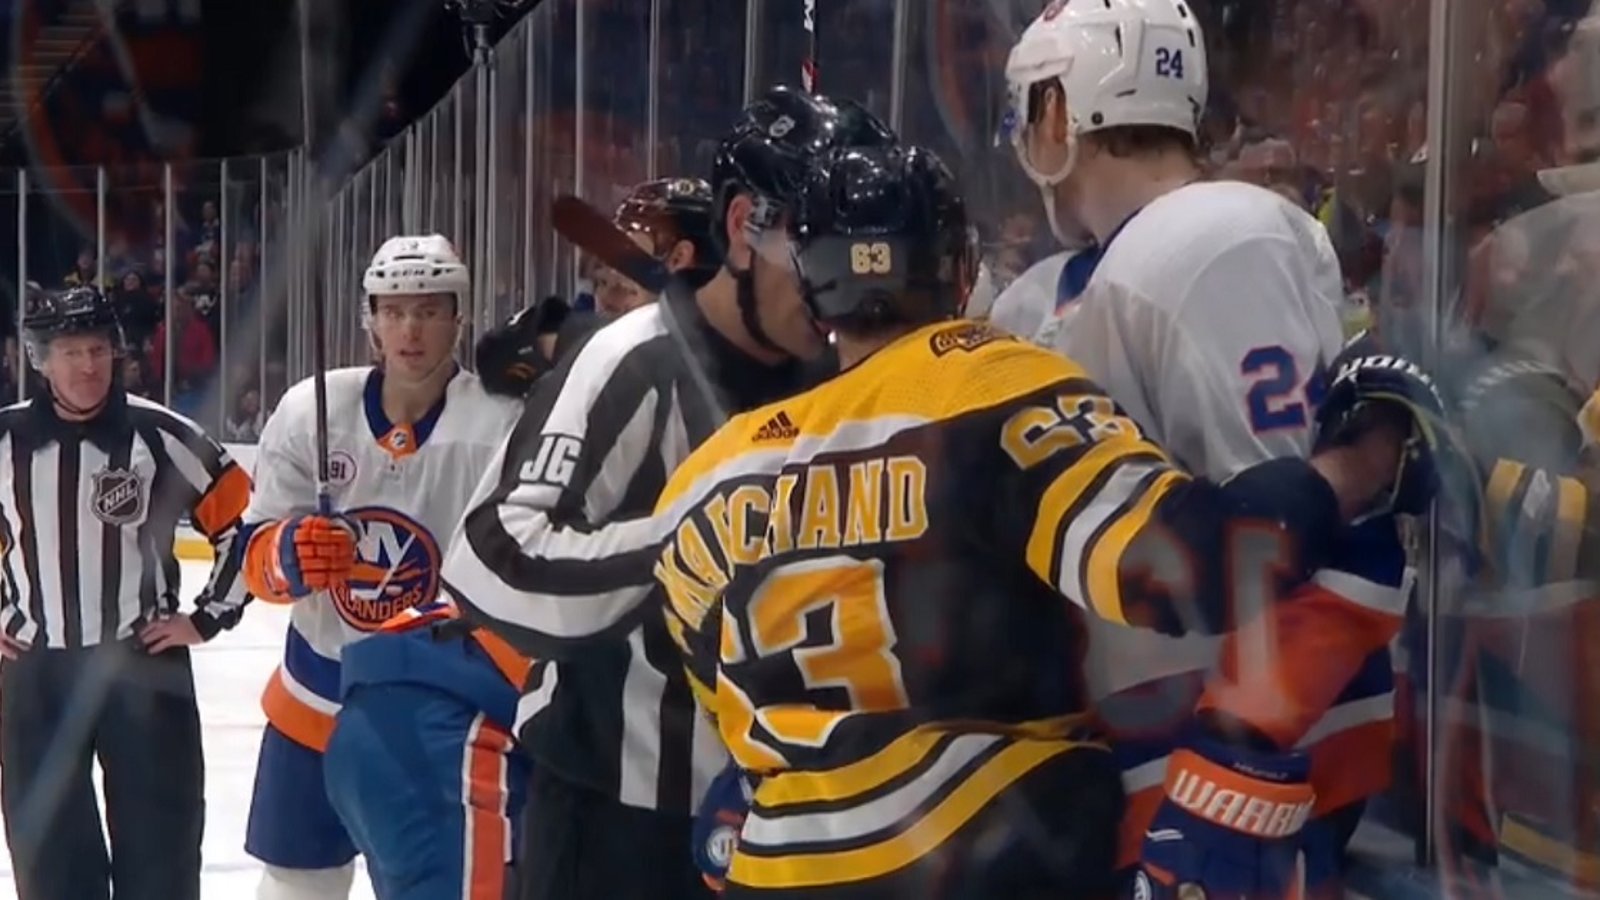 Tempers flare in Boston after more shenanigans between Marchand and Komarov.